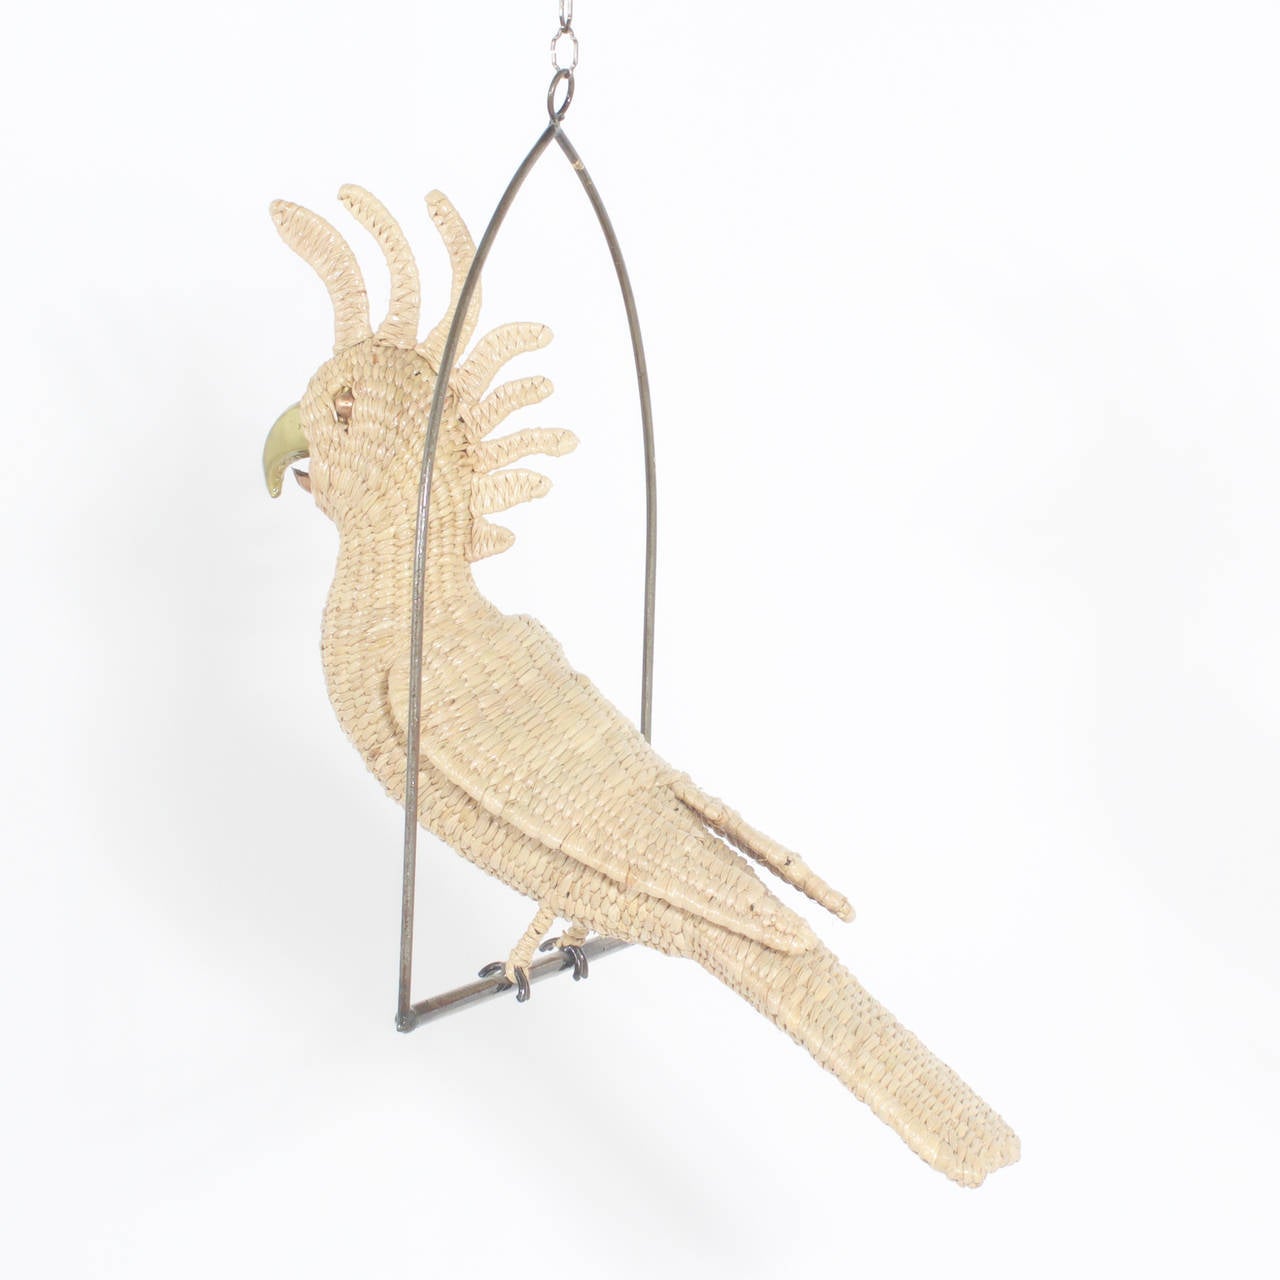 Amusing midcentury Mario Torres wicker Cockatoo perched on a metal swing. Having a brass face and beak. He appears to be saying something cheeky.